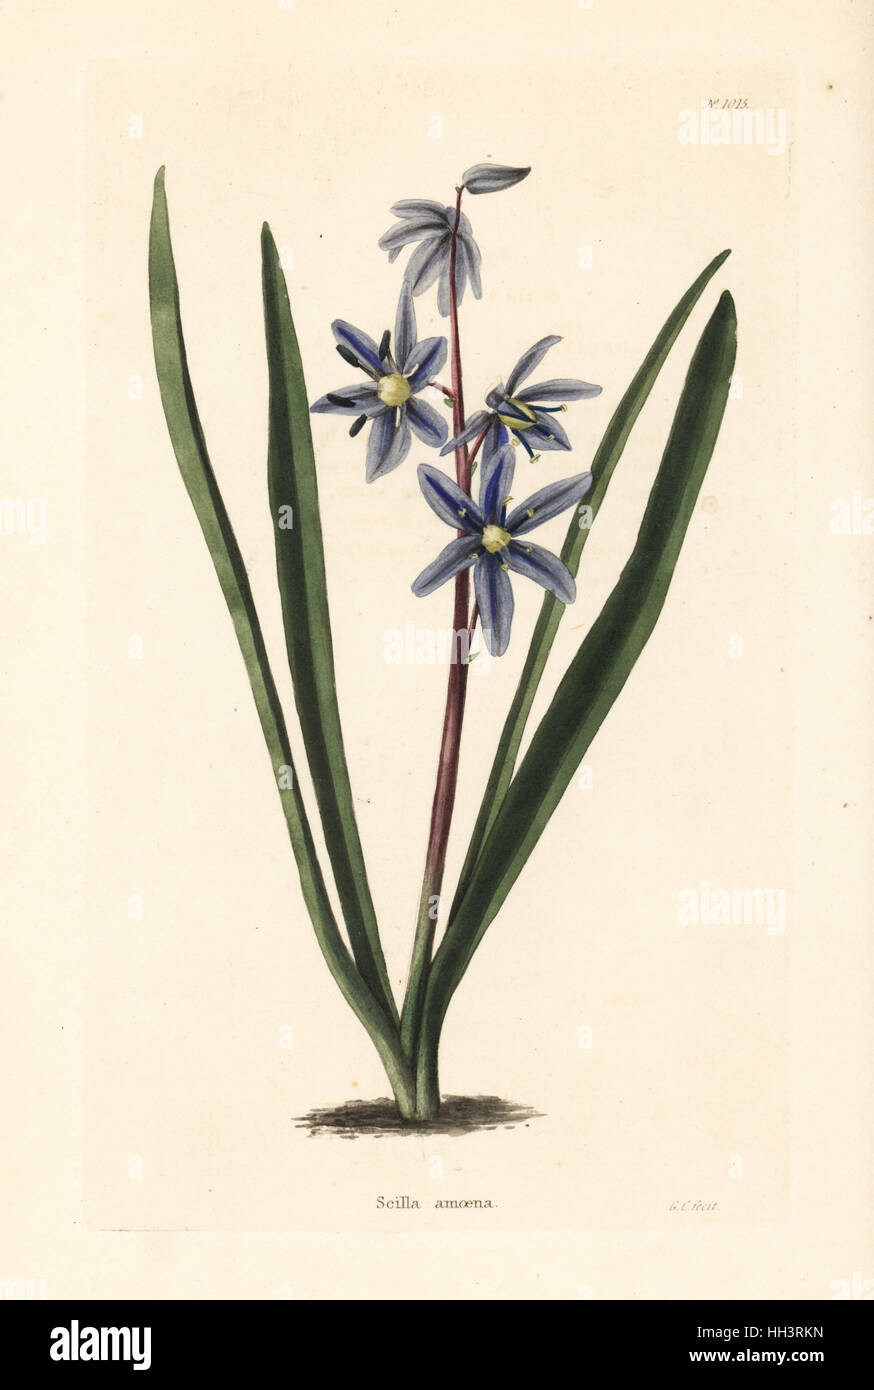 Squill, Scilla amoena. Handcoloured copperplate engraving by George Cooke from Conrad Loddiges' Botanical Cabinet, Hackney, 1825. Stock Photo